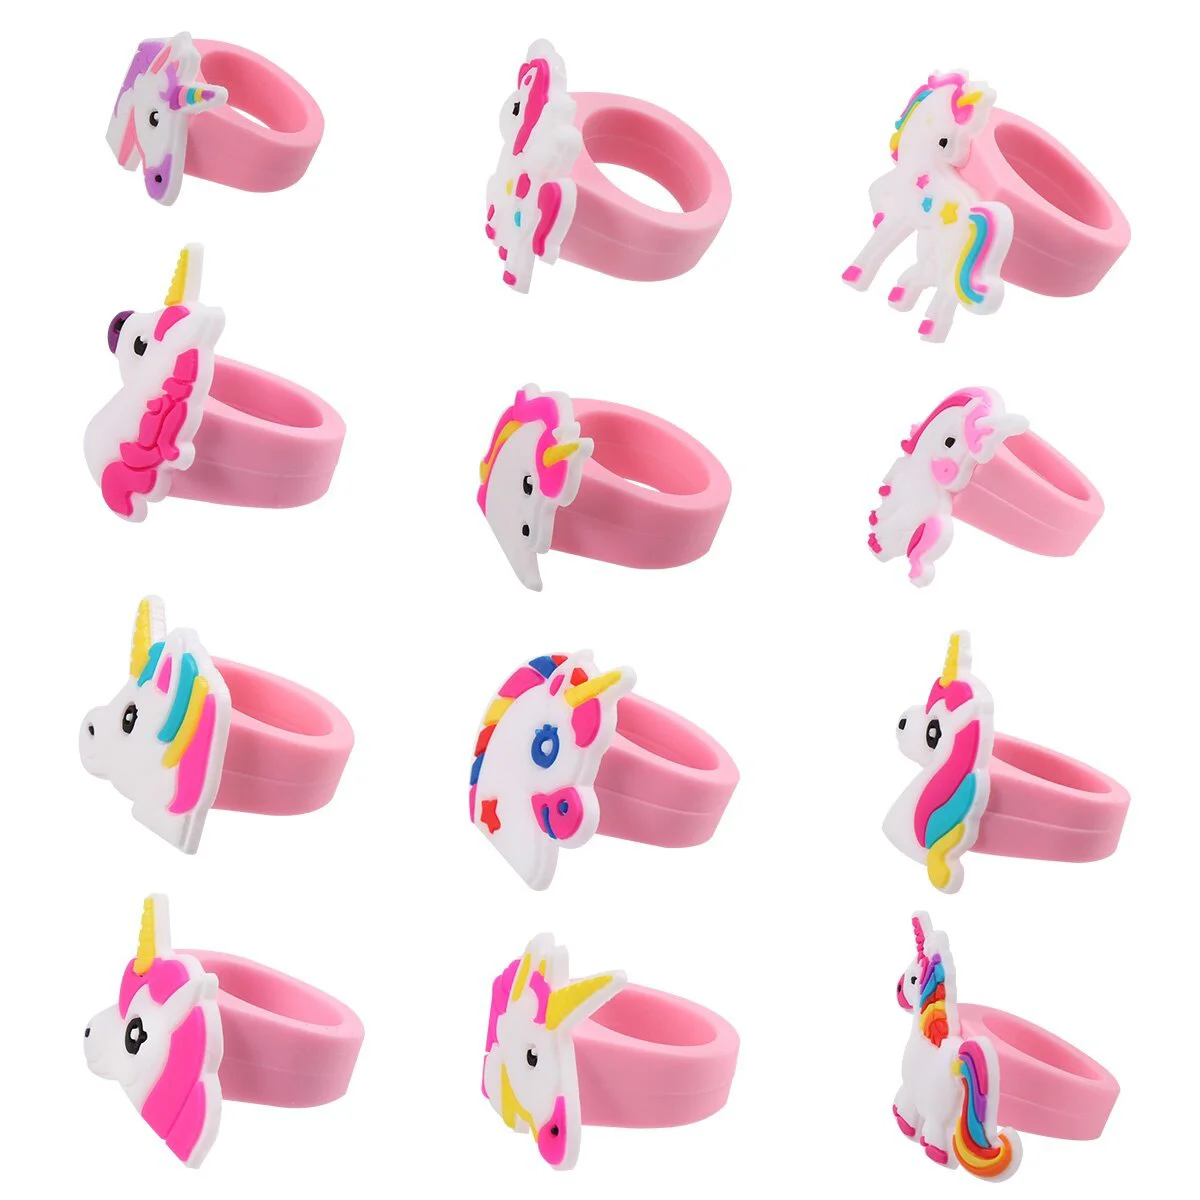 

12PCS PVC Children Rings Adorable Unicorn Shape Rings Decorative Jewelry Birthday Party Favors Gifts for Kids